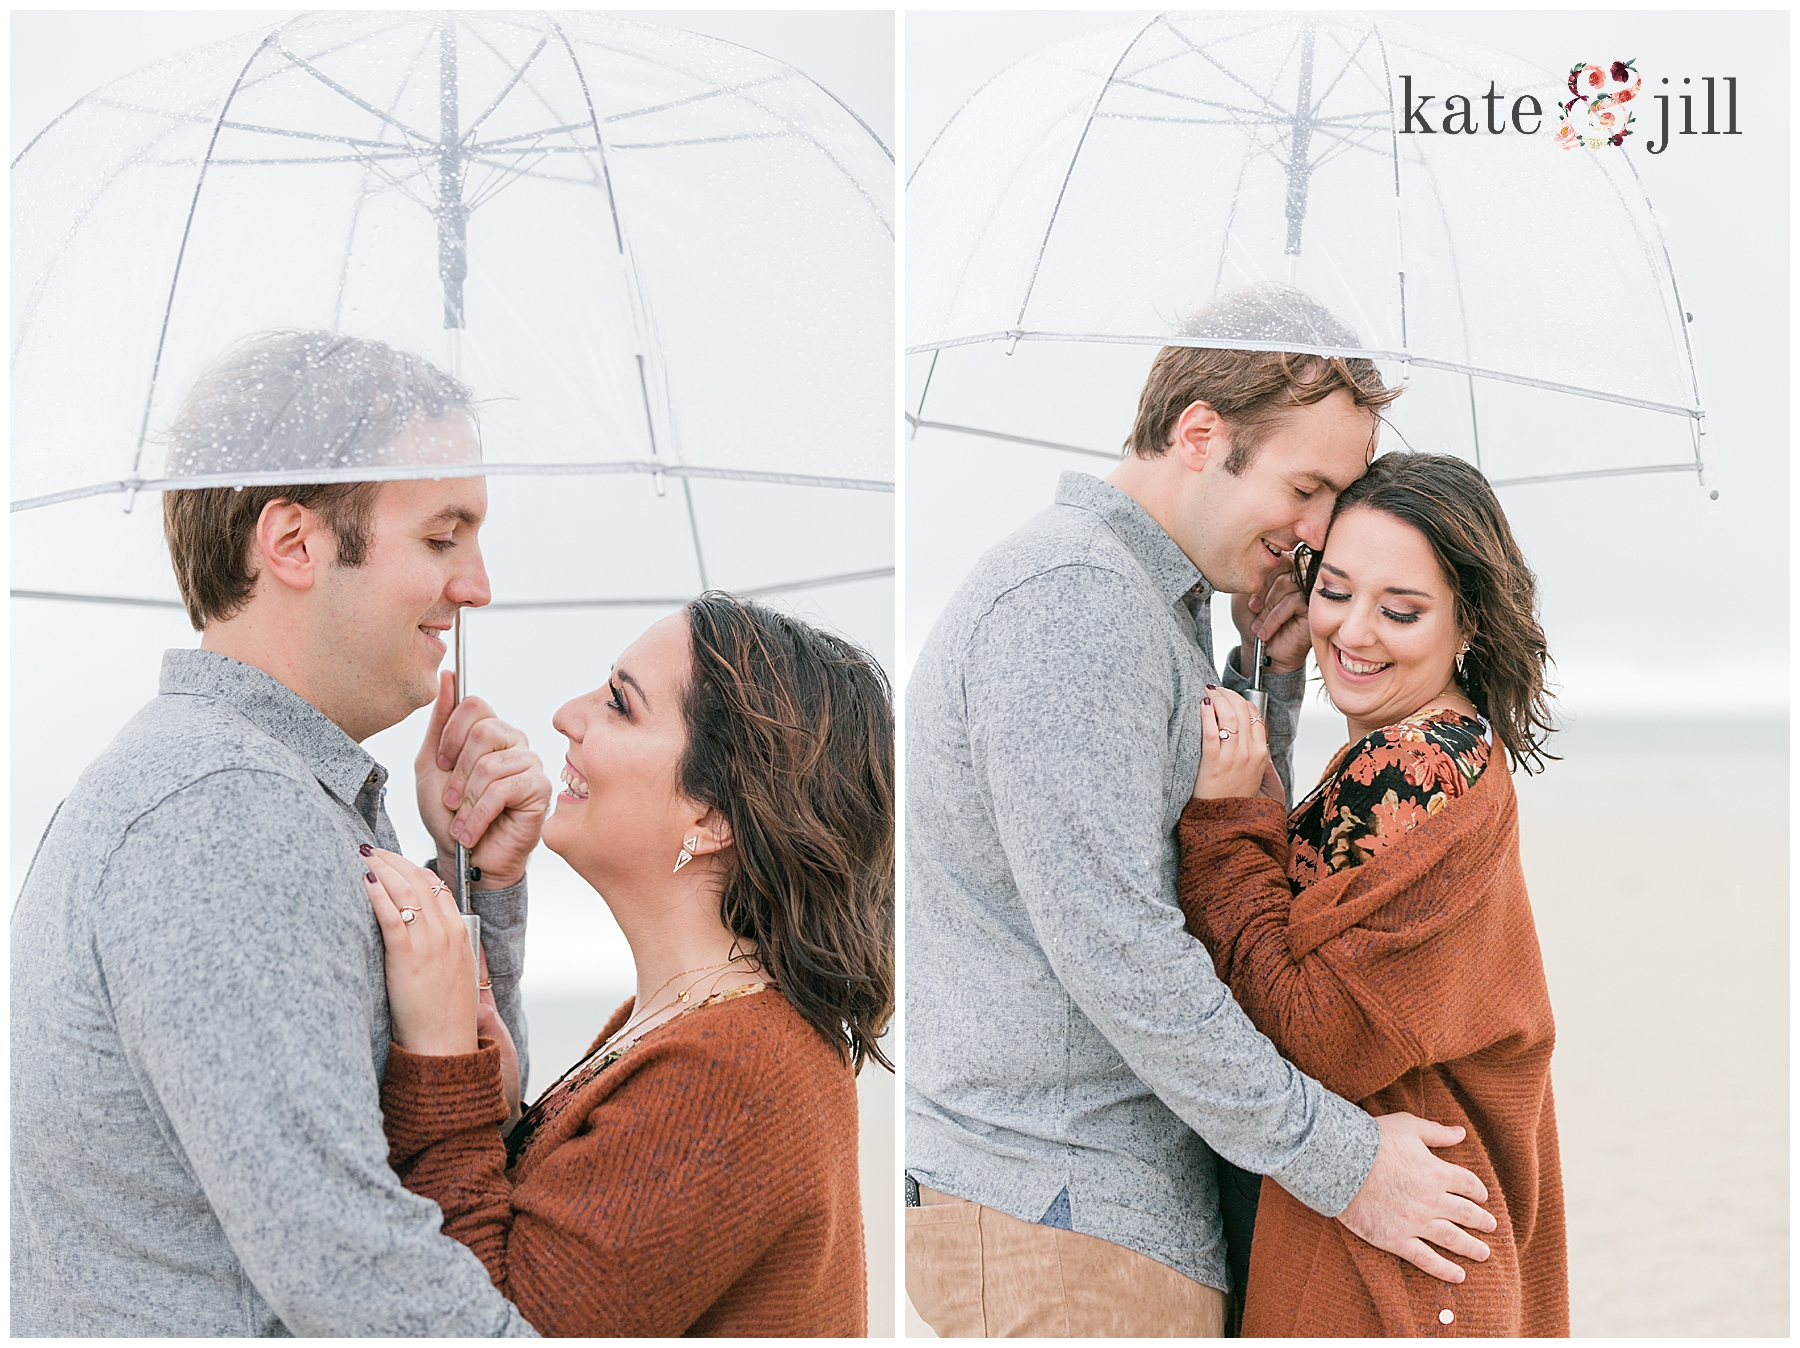 Rain Engagement Pictures best of 2018 weddings and engagements